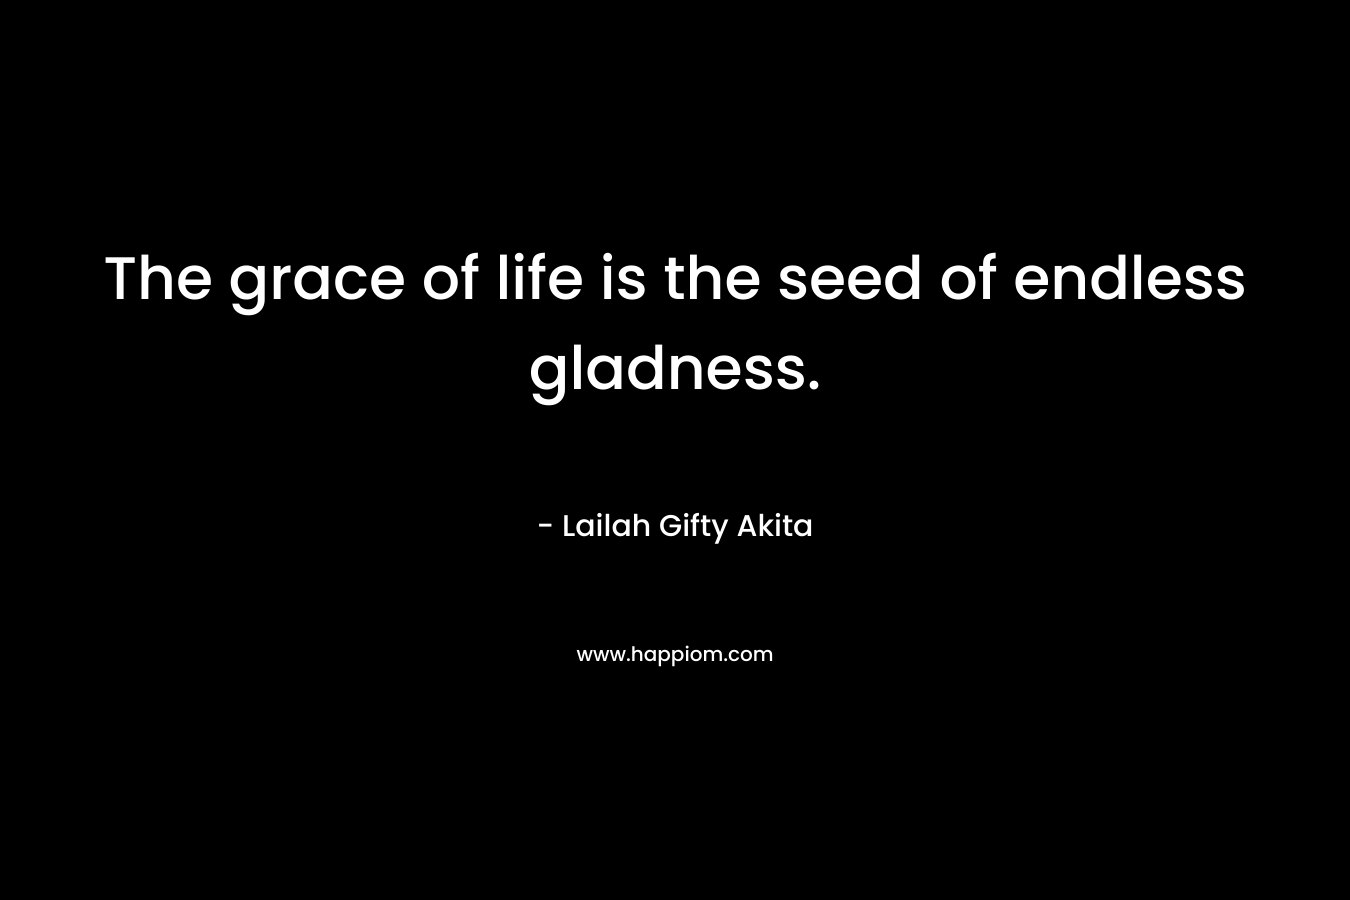 The grace of life is the seed of endless gladness.